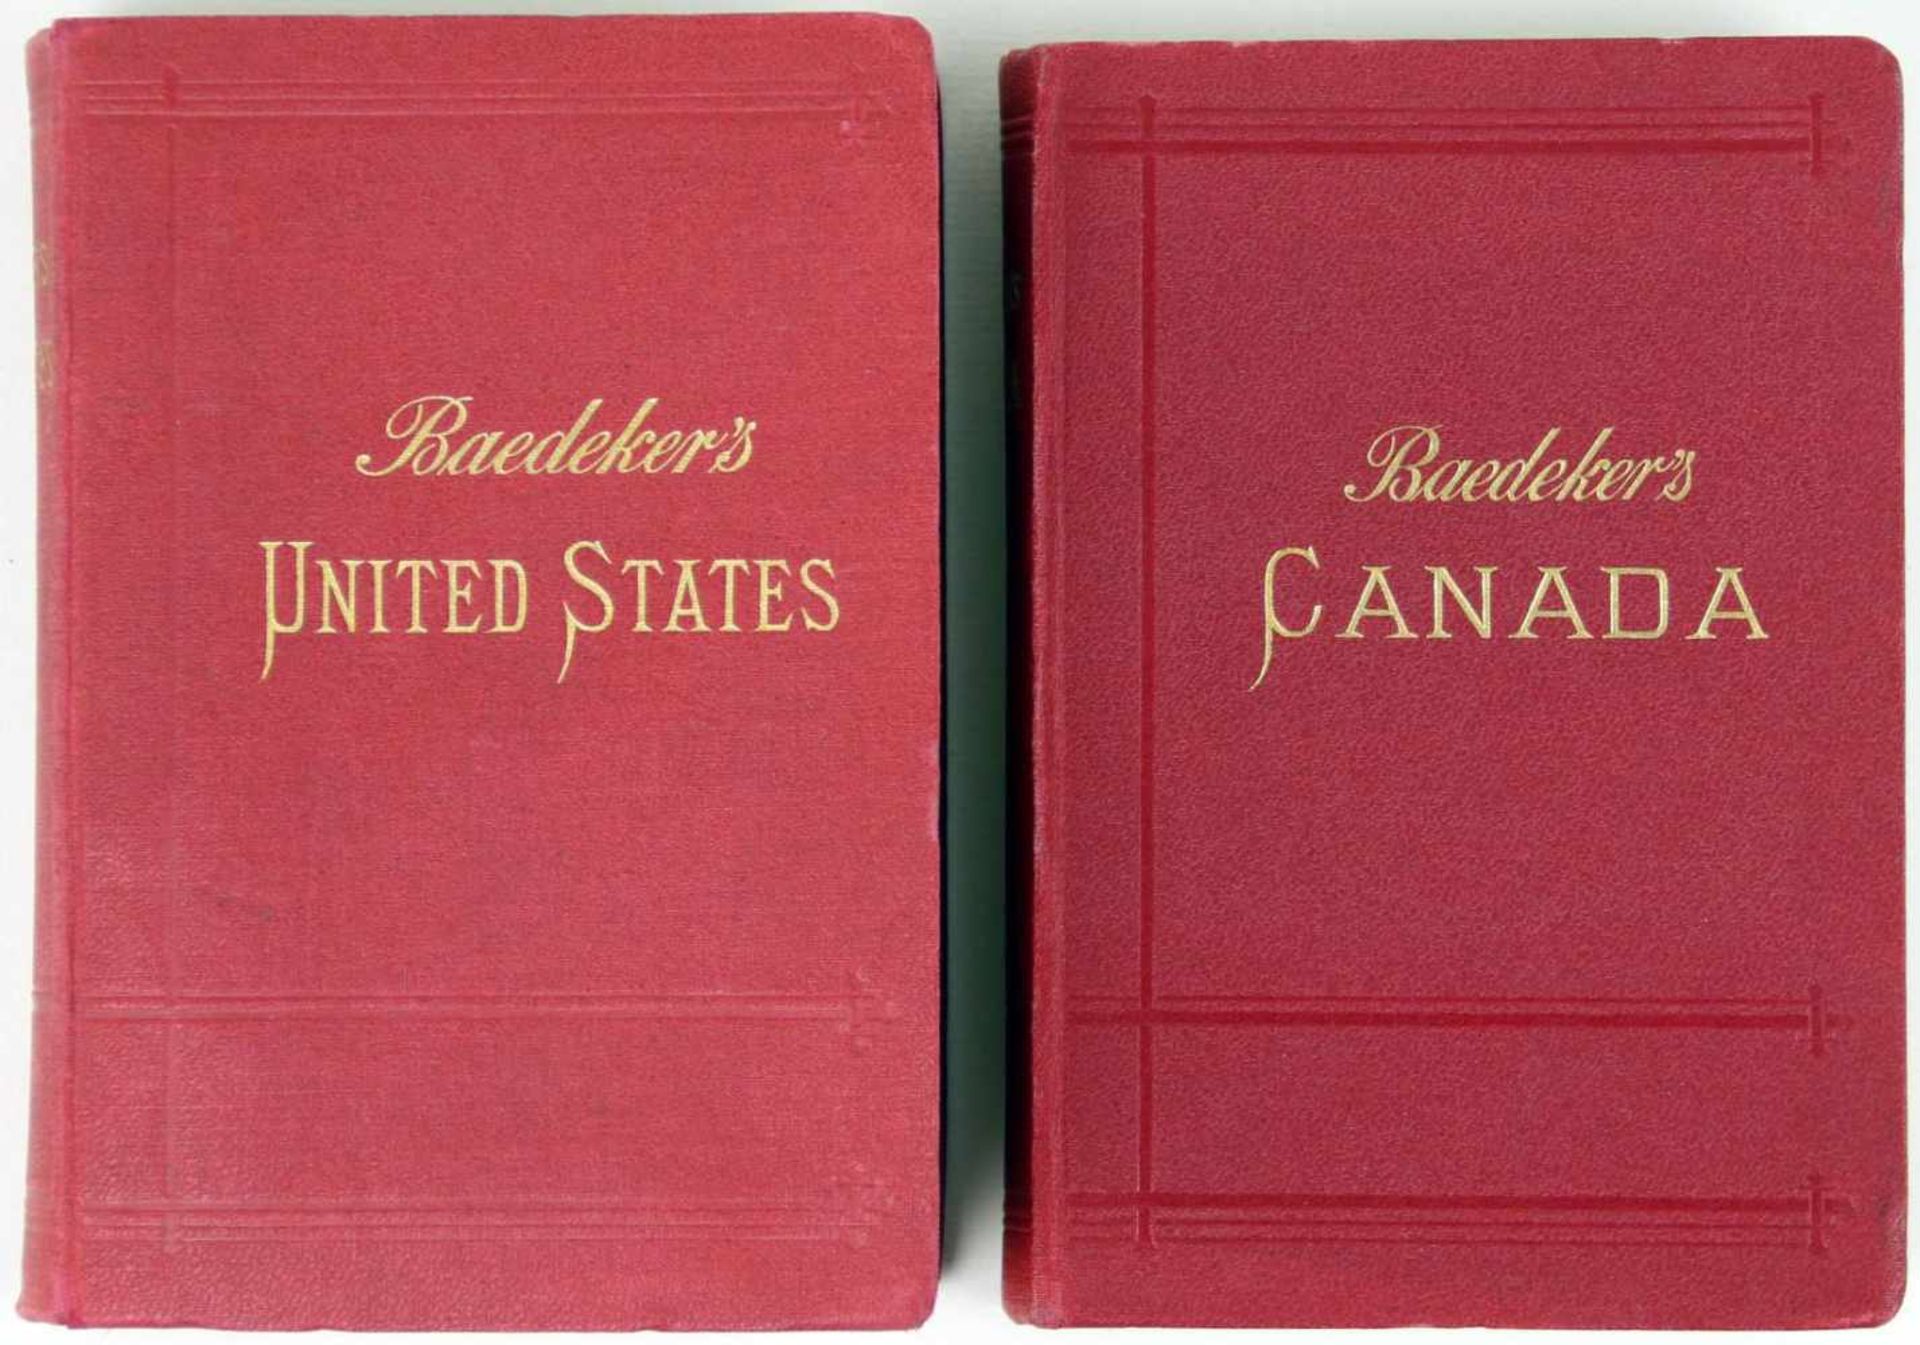 Baedeker, Karl: The United States with an Excursion into Mexico. Handbook for Travellers. Third